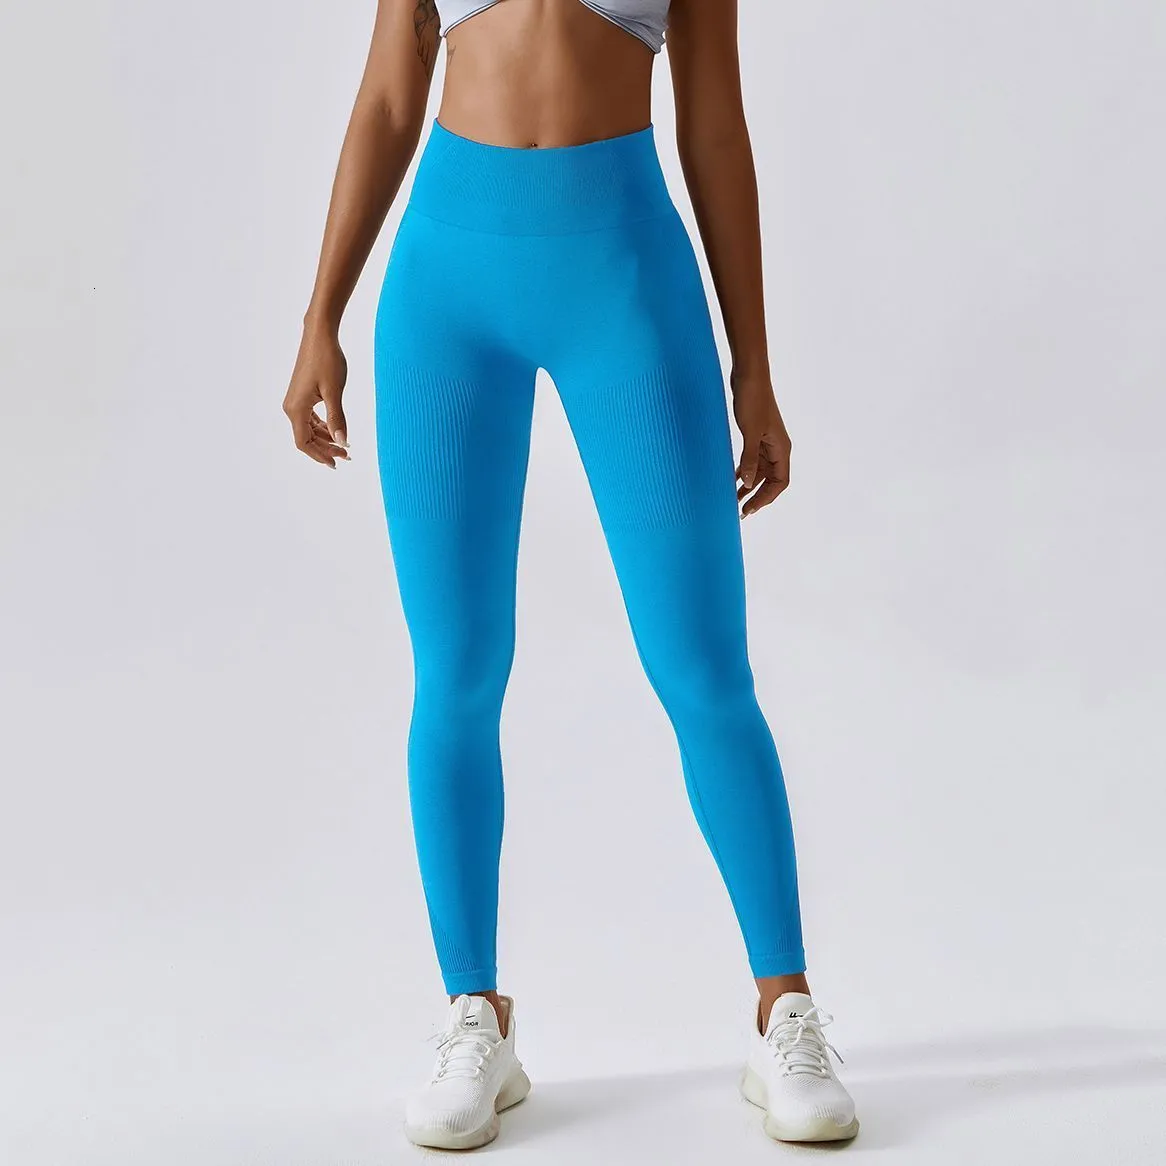 Seamless Ribbed Contour Seamless Workout Leggings For Women Sculpt Scrunch  Design, Gym Ruched Fabric, 7/8 Inches, Fitness Tights For Yoga, Sports, And  Workouts Style 230505 From Kong00, $16.73